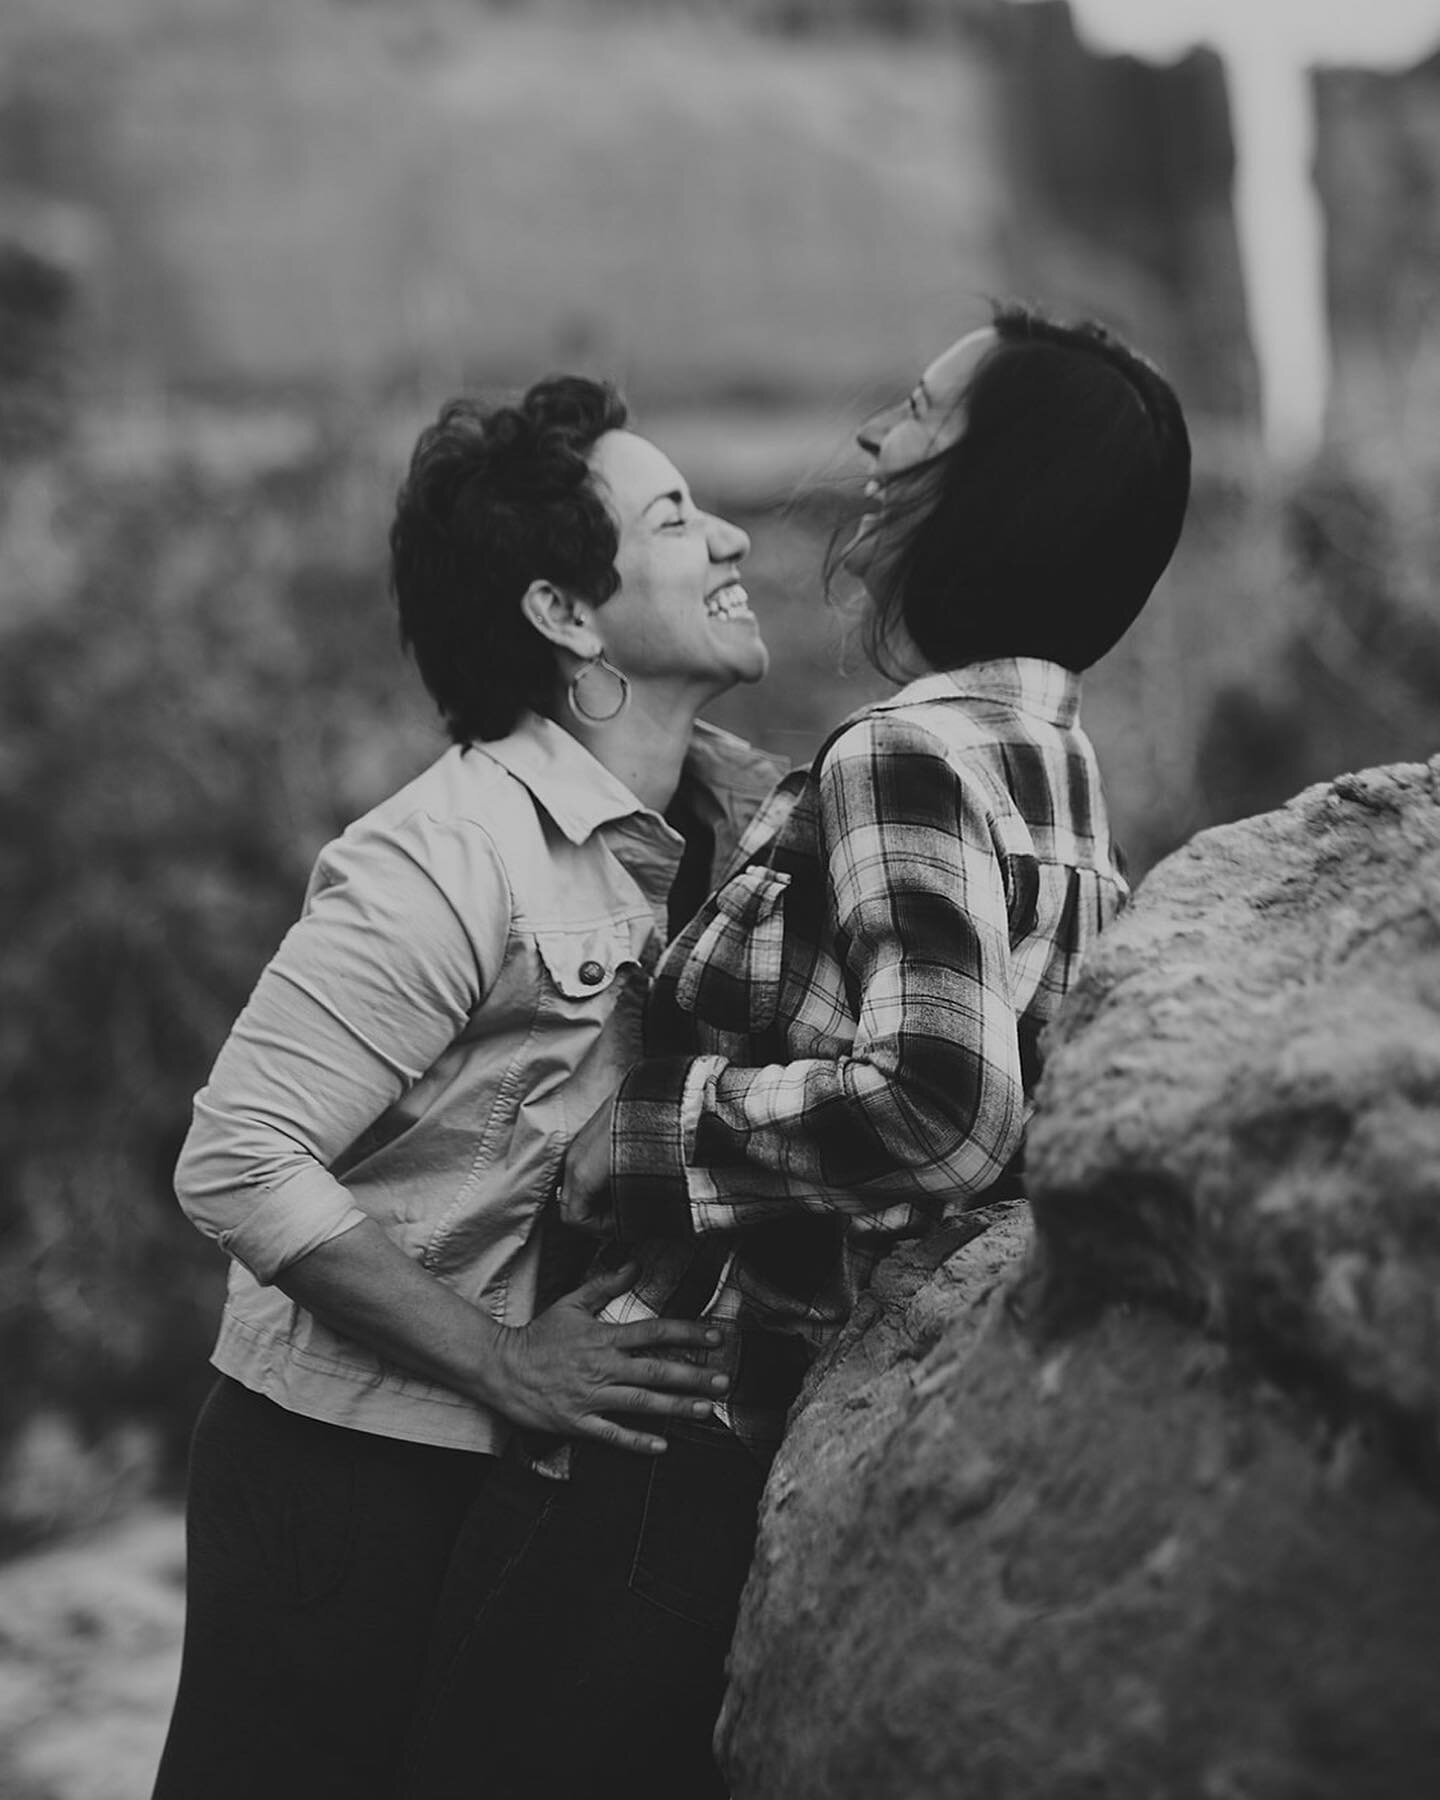 When a proposal/engagement session lines up with your Moab camping trip. 

Adventuring around Moab with our cameras and this couple was the perfect end to our stay. 💛

#queercouple #queerlove #queerweddingphotographer #moabengagement #moabengagement